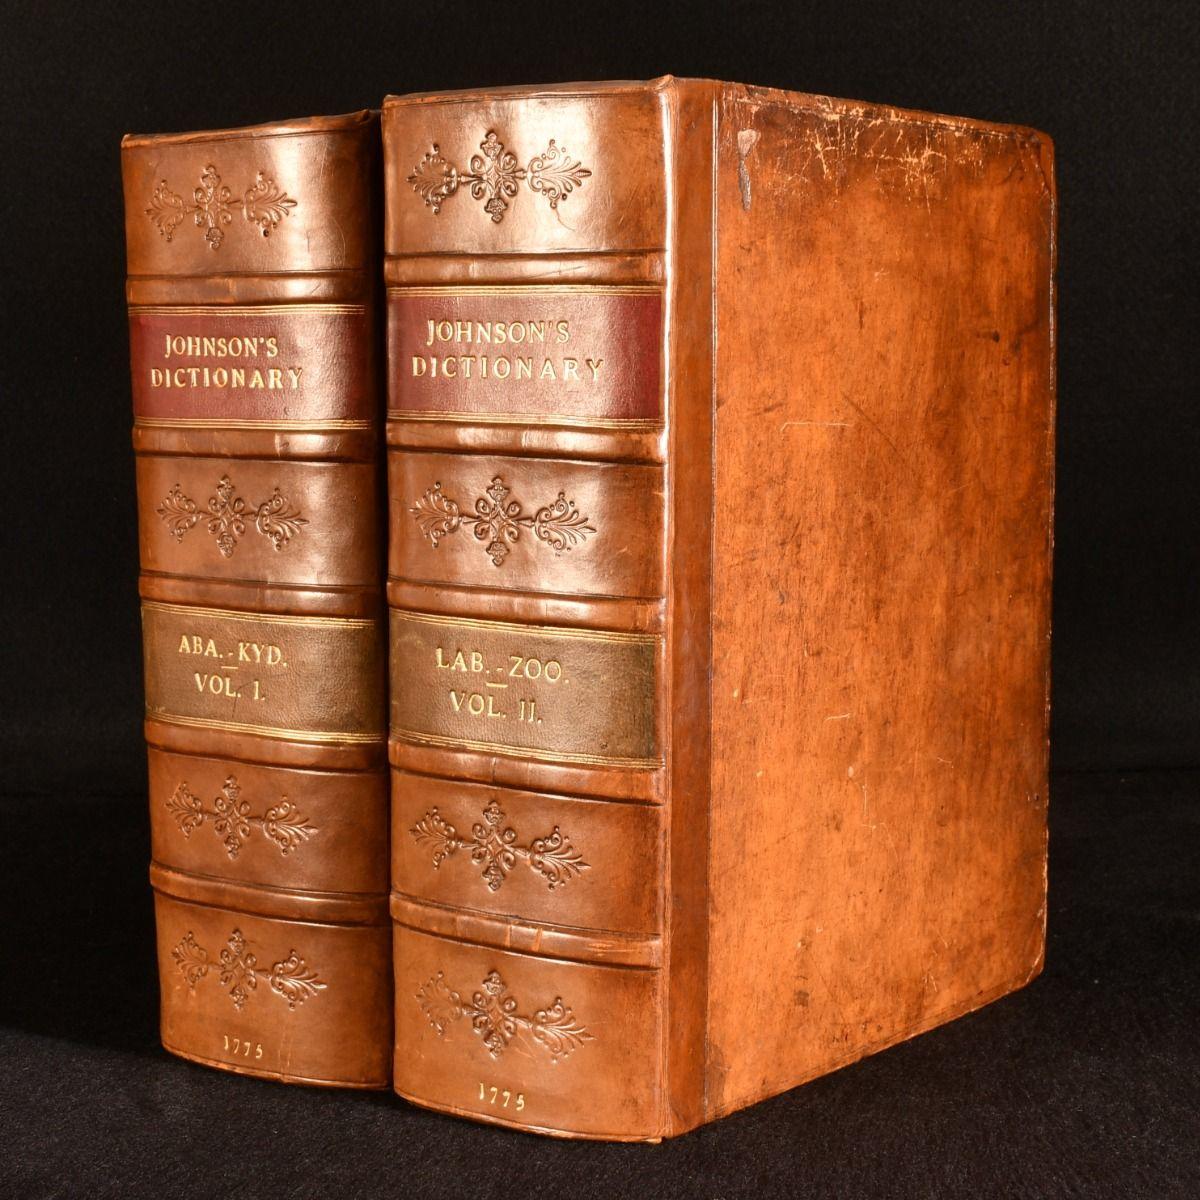 An important edition of Samuel Johnson's dictionary of the English language, being the first complete edition to be printed in Ireland.

The first edition thus, being the first quarto edition and first complete edition printed in Ireland.

This